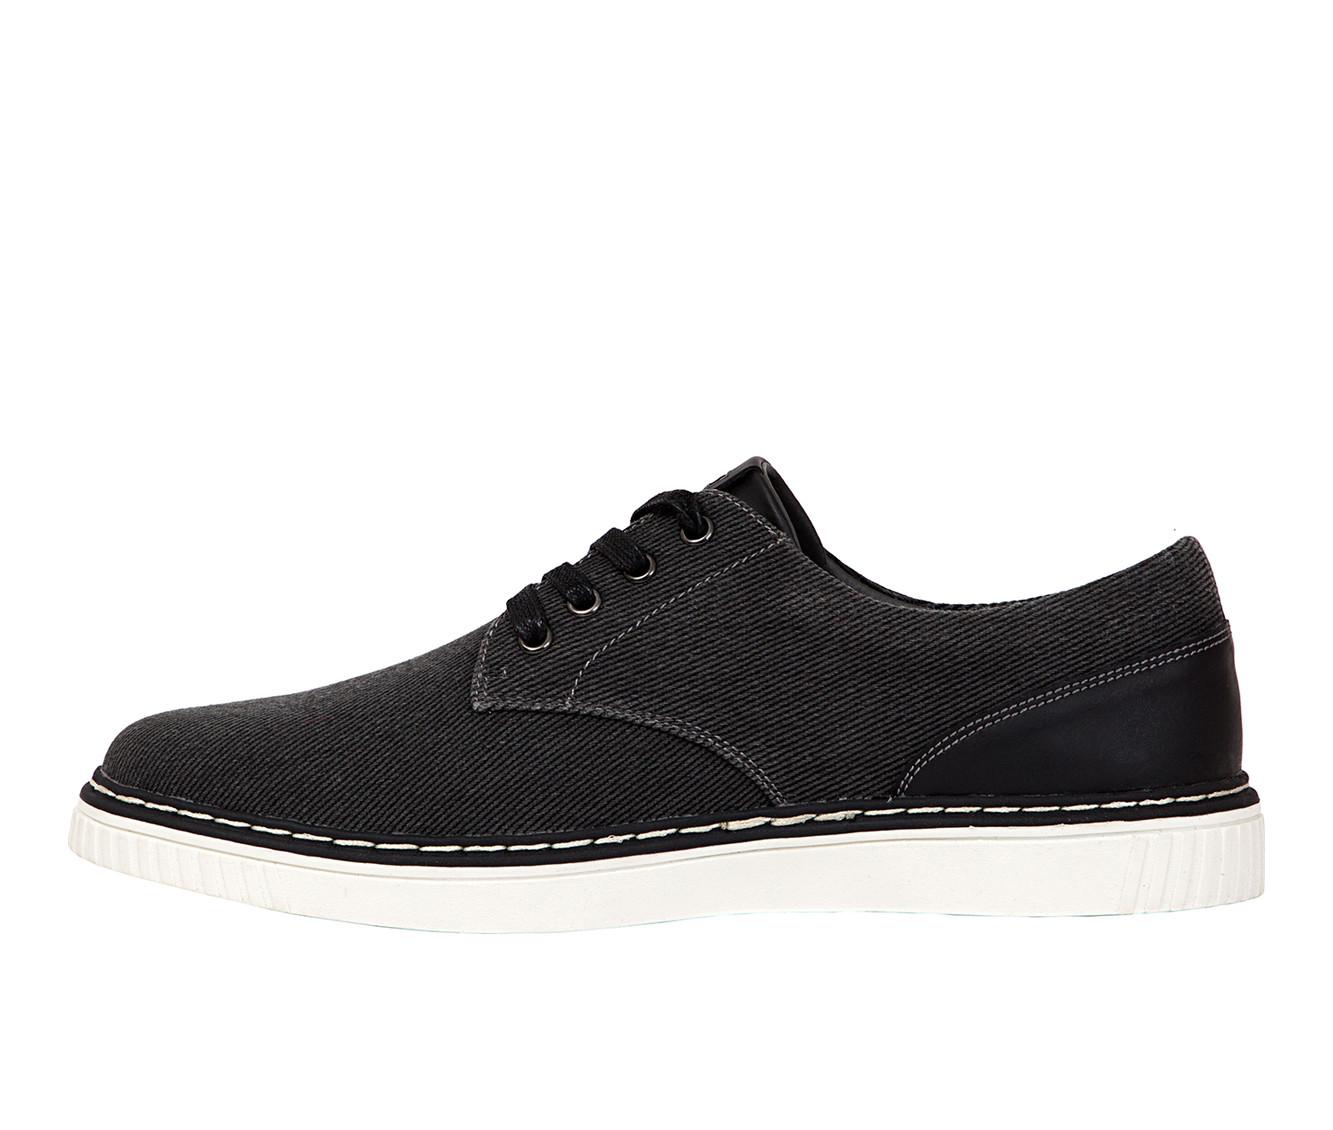 Men's Deer Stags Stockton Casual Oxfords